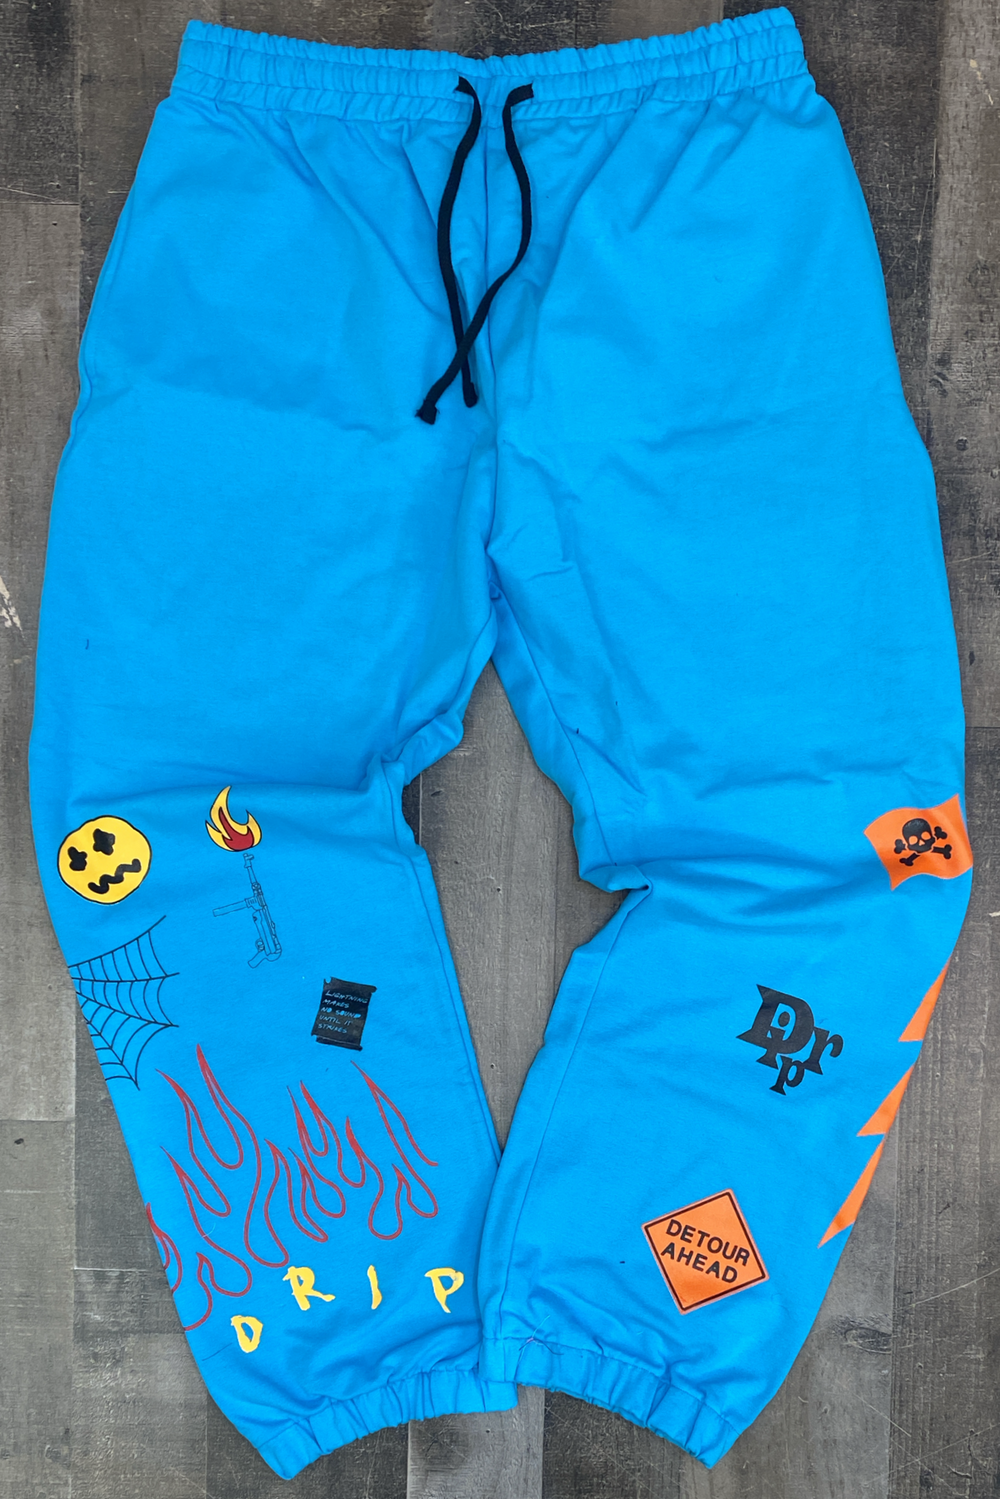 Cooper 9 - “flame on drip” sweatpants pacific blue